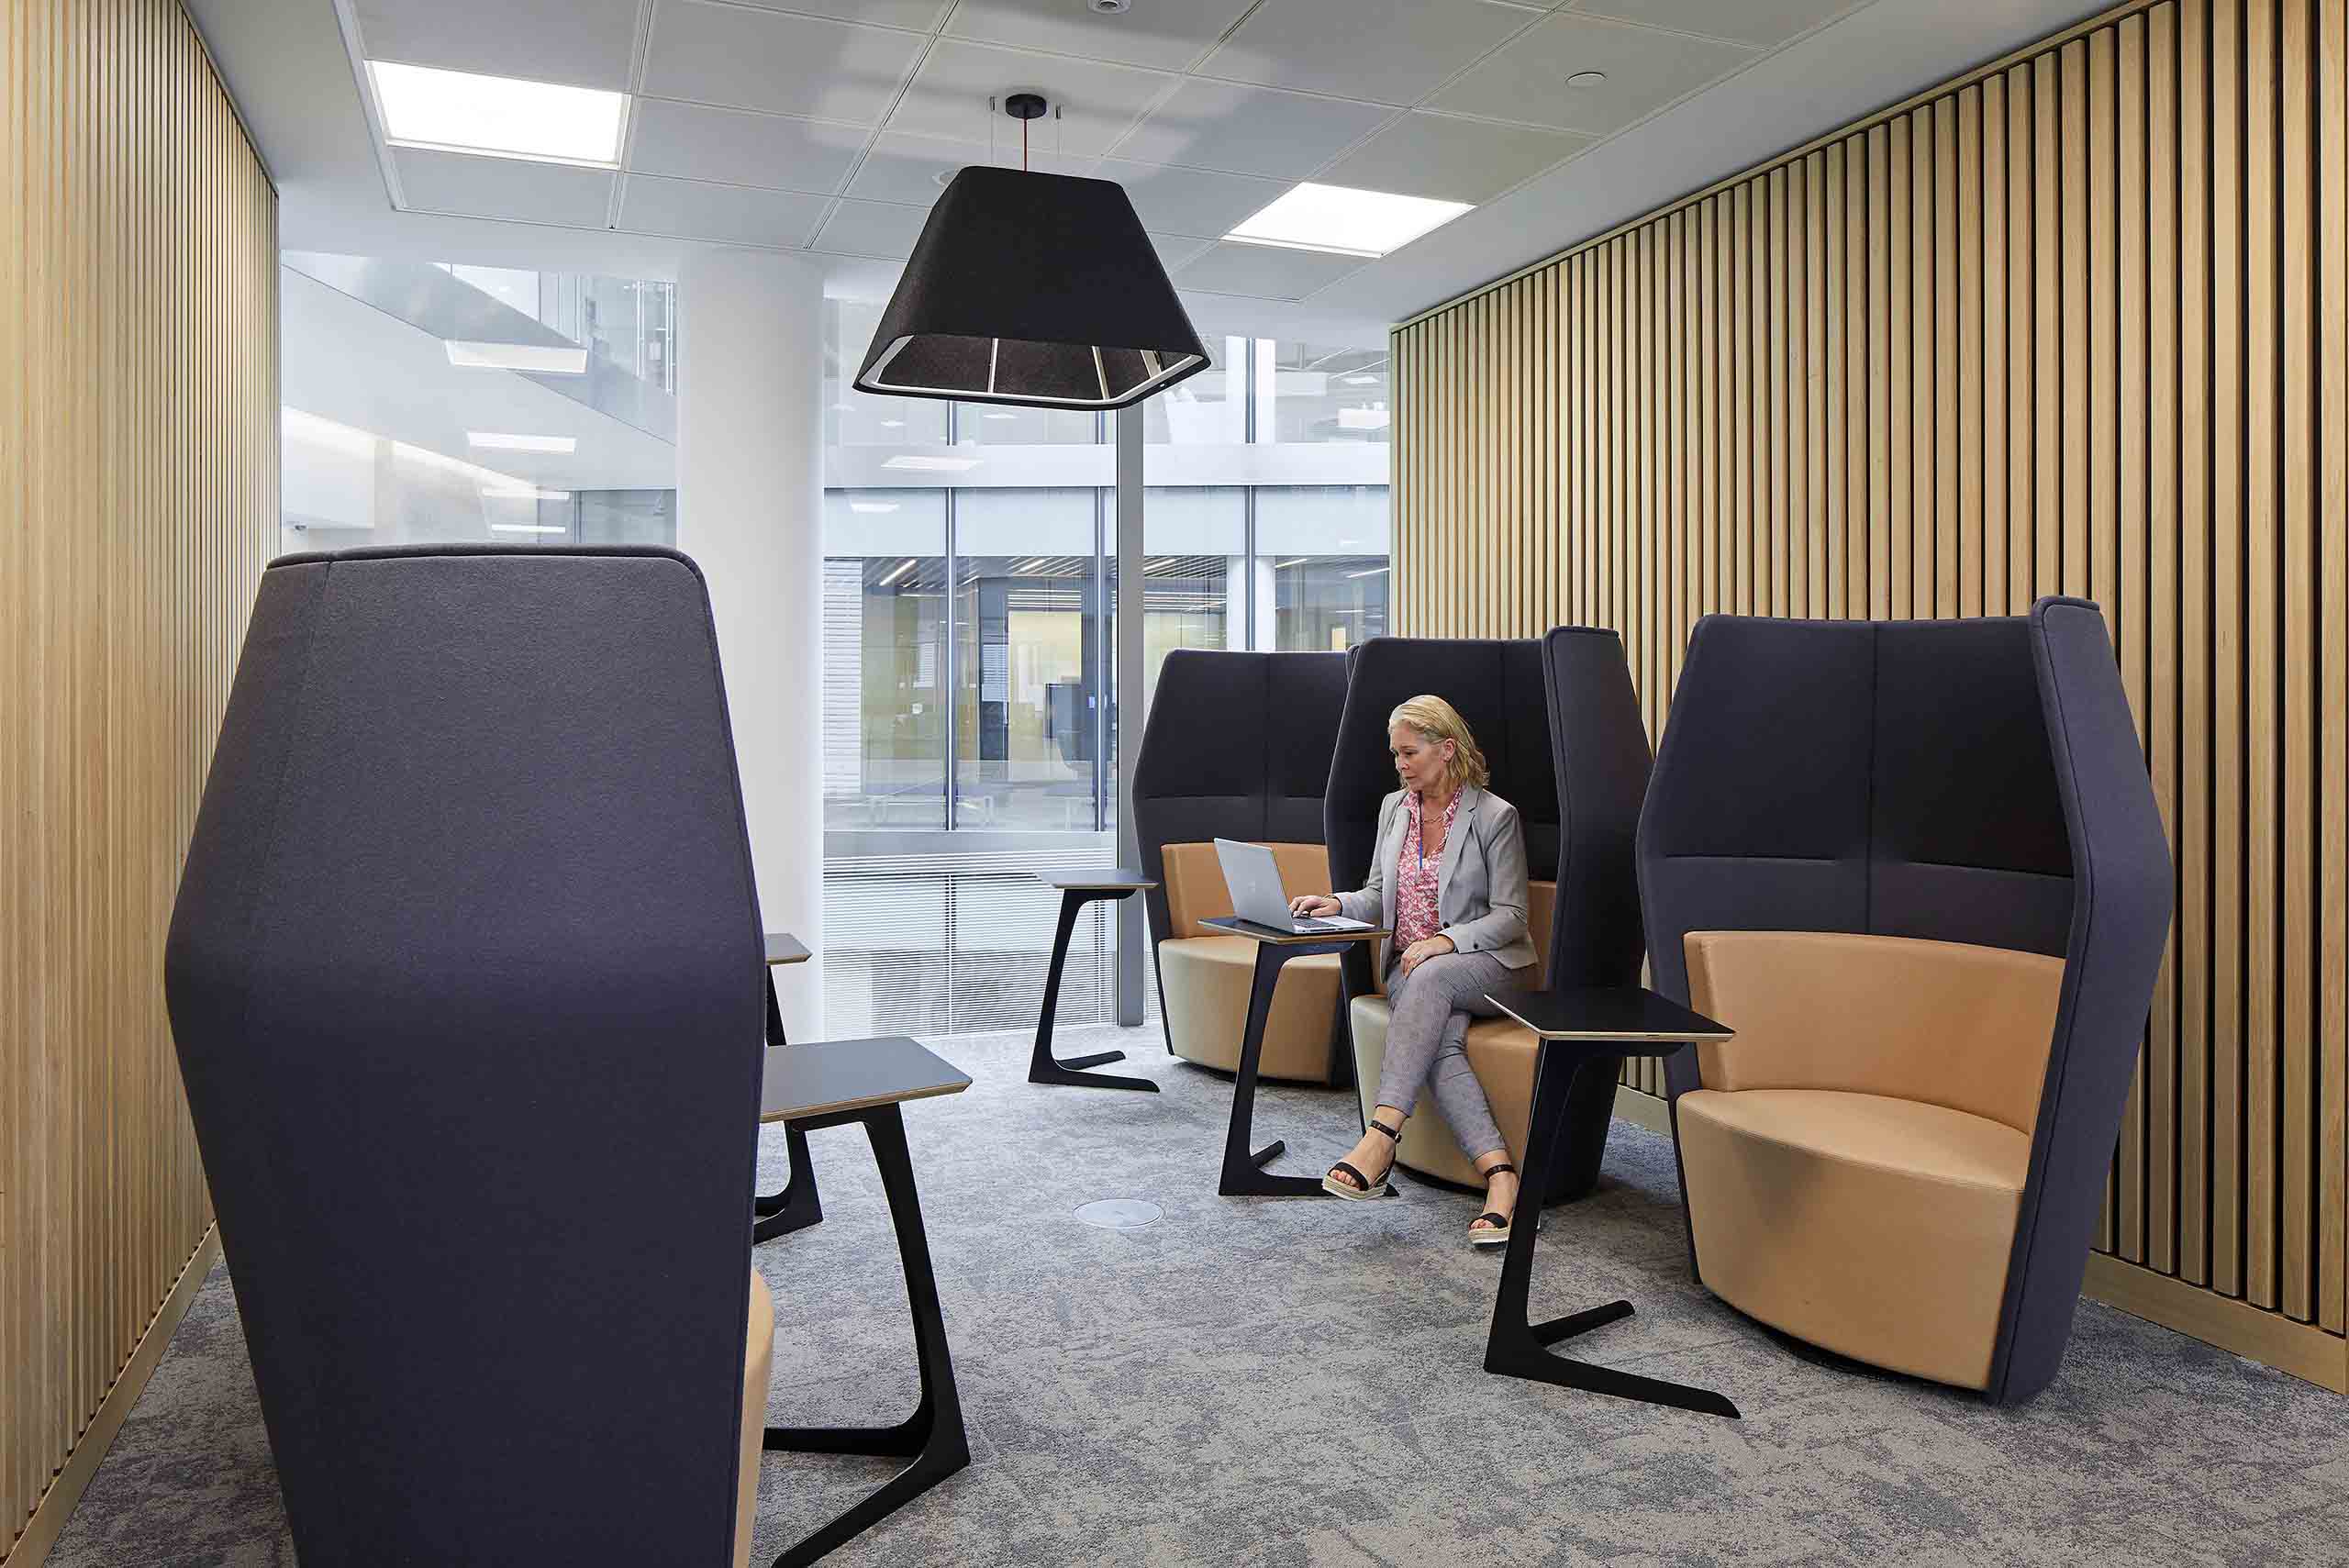 6 individual meeting chairs with high sides for privacy and small table